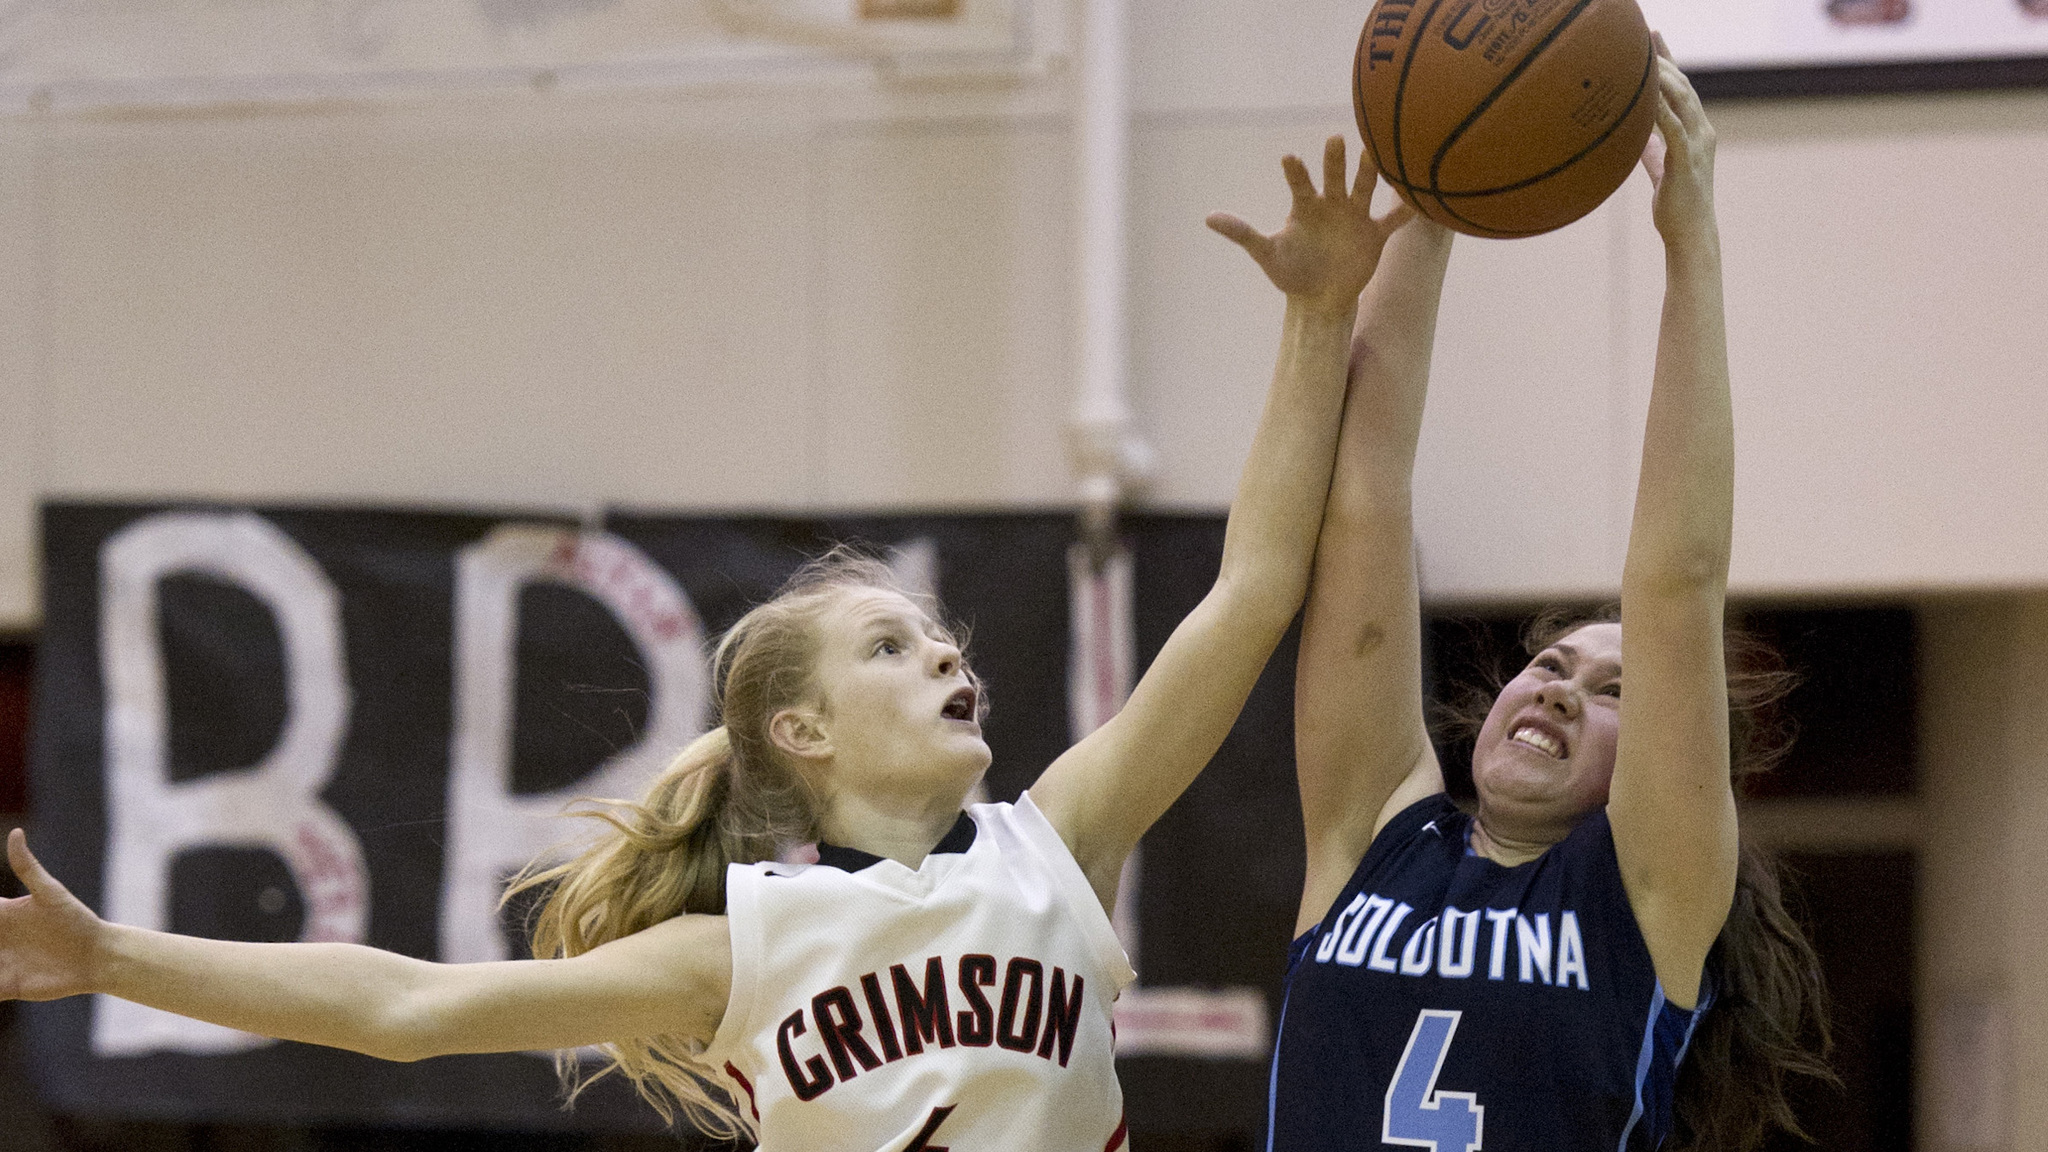 Juneau-Douglas’ Sadie Tuckwood, left, and Soldotna’s Mei Miller go for ball at JDHS on Friday. JDHS won 48-46. (Michael Penn | Juneau Empire)